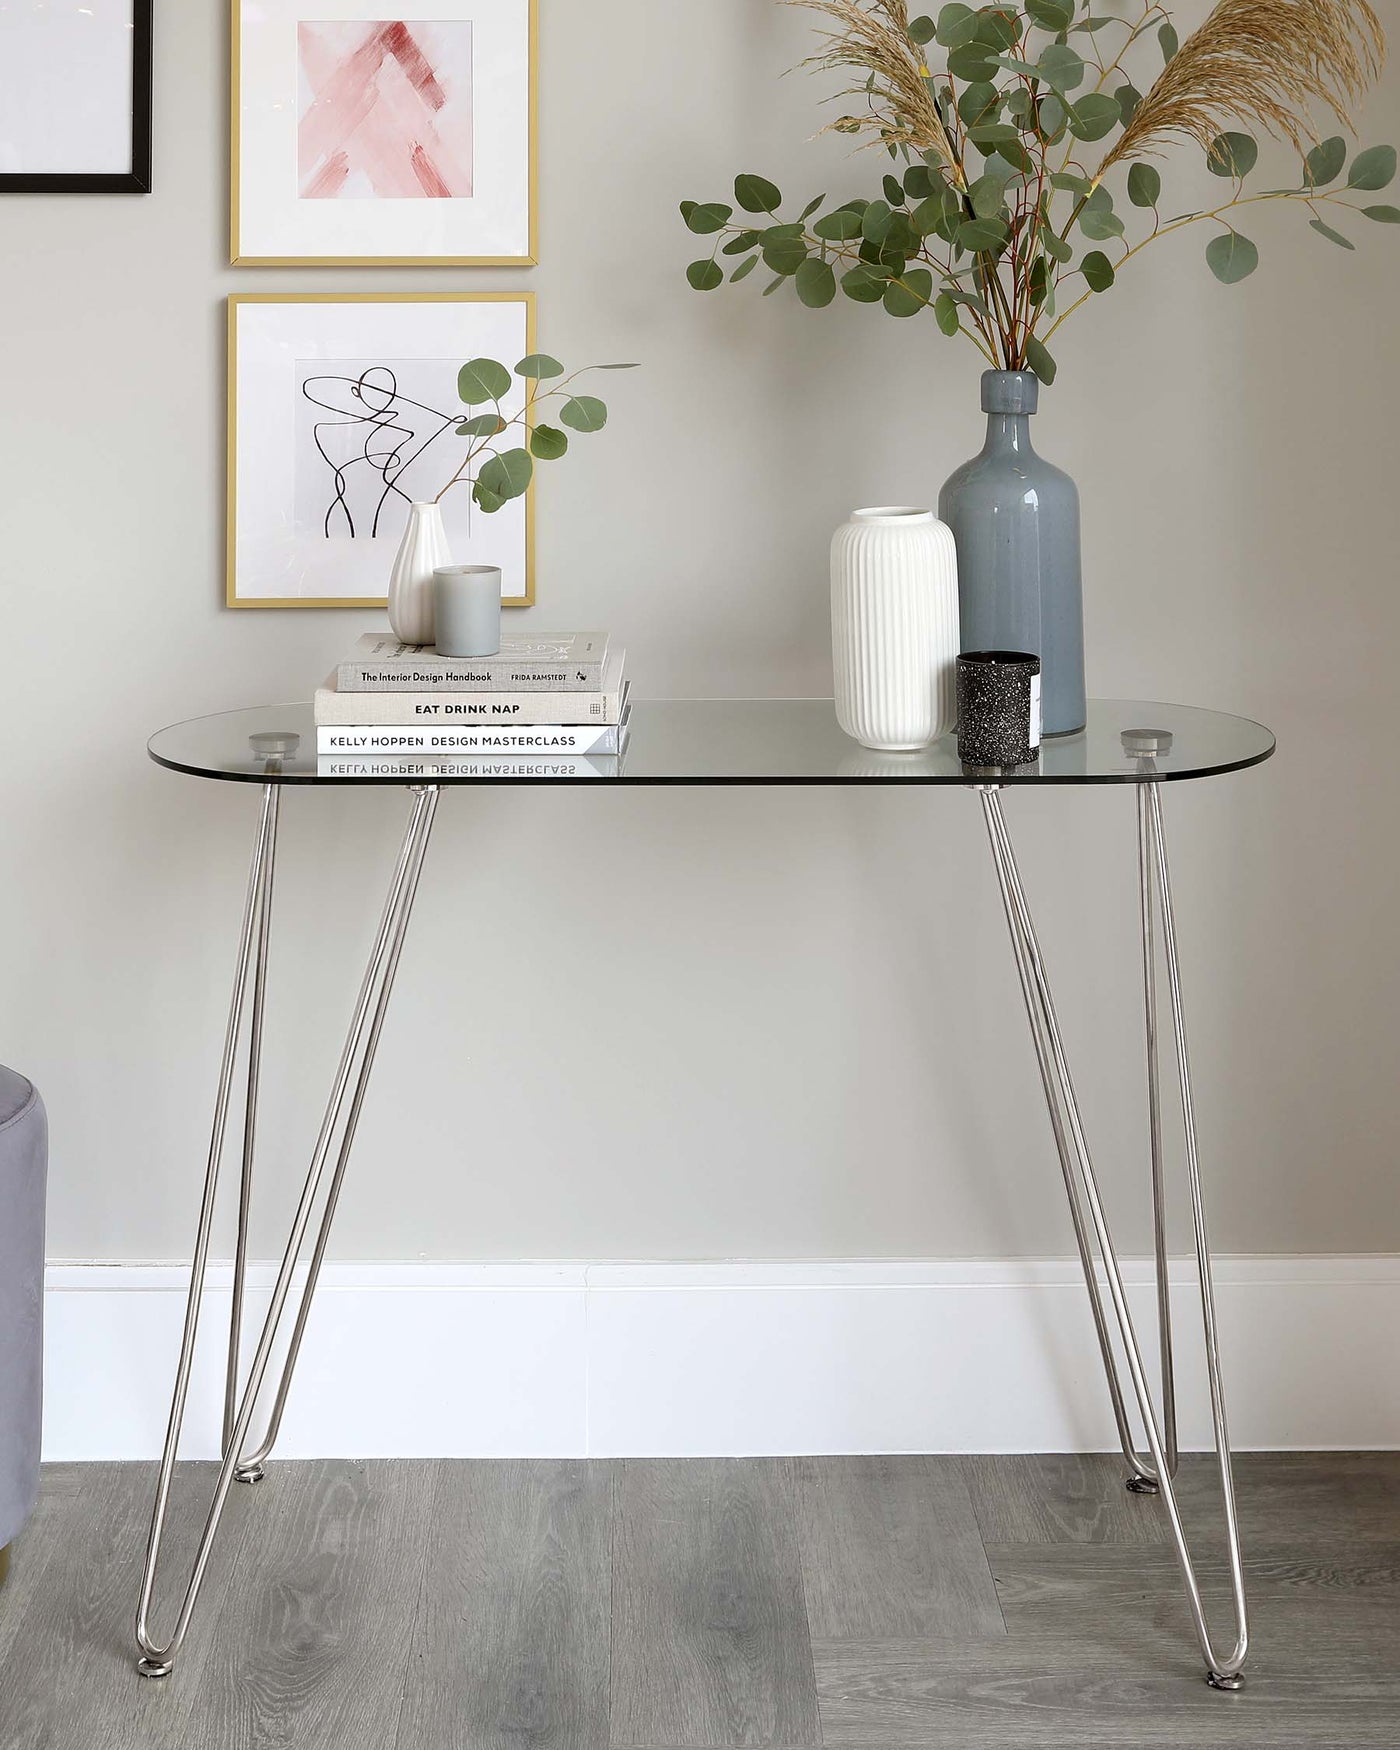 A modern, minimalist style glass console table with thin, tapered, high-shine chrome legs that cross under the tabletop forming a sleek, X-shaped base. The transparent glass top is rectangular with rounded edges, contributing to the table's elegant and contemporary design. The table is accessorized with decorative items, emphasizing its use as a stylish surface for displaying objects.